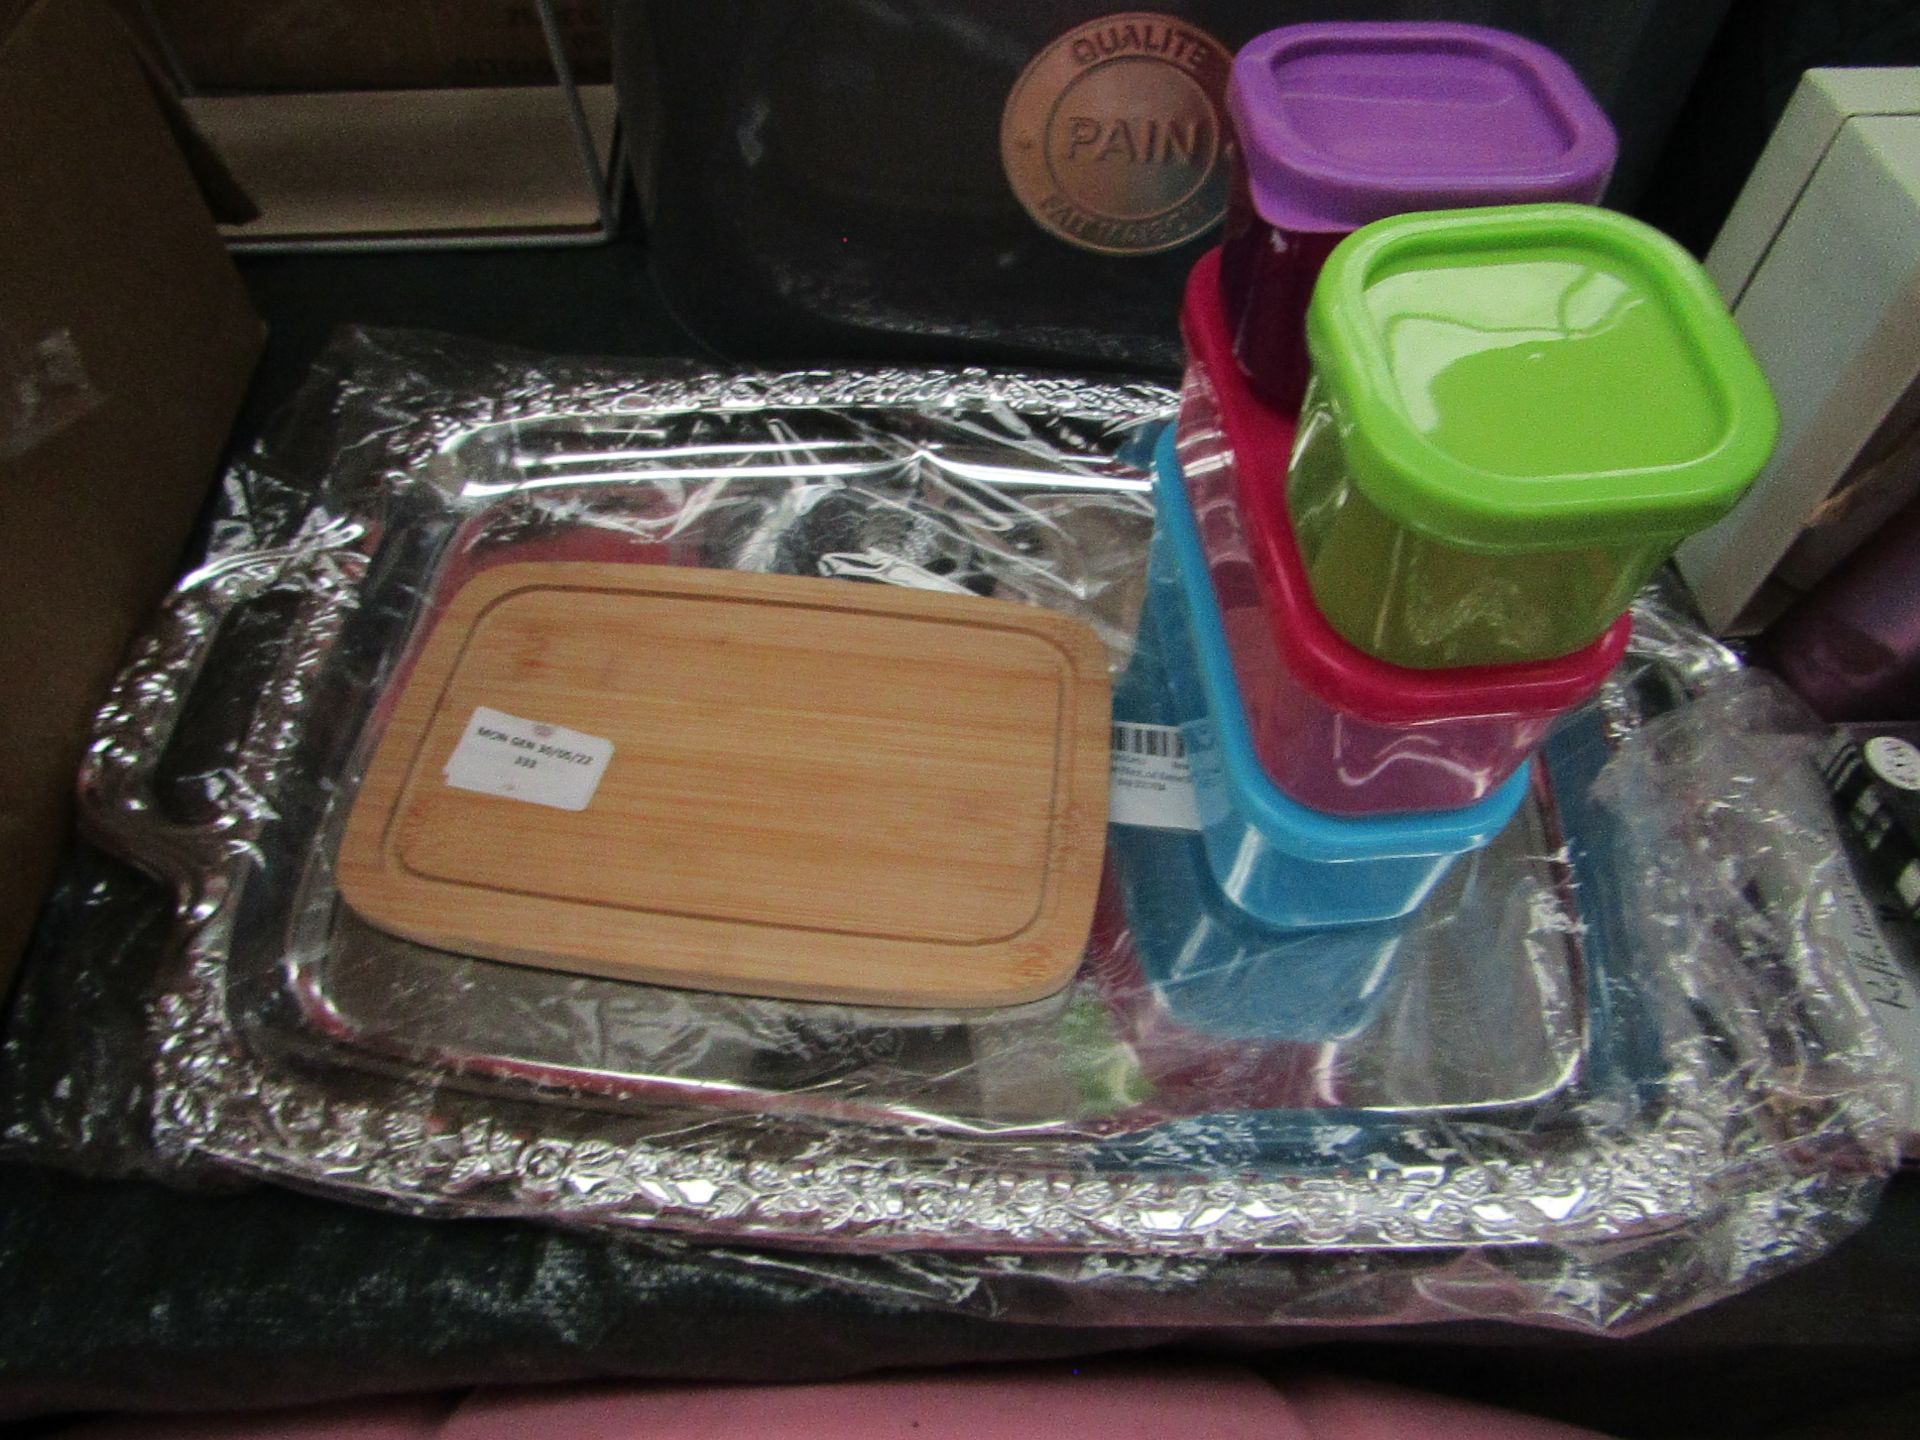 1x Small 4-Piece Plastic Boxes - No Packaging. 1x Small Bamboo Chopping Board - No Packaging. 1x